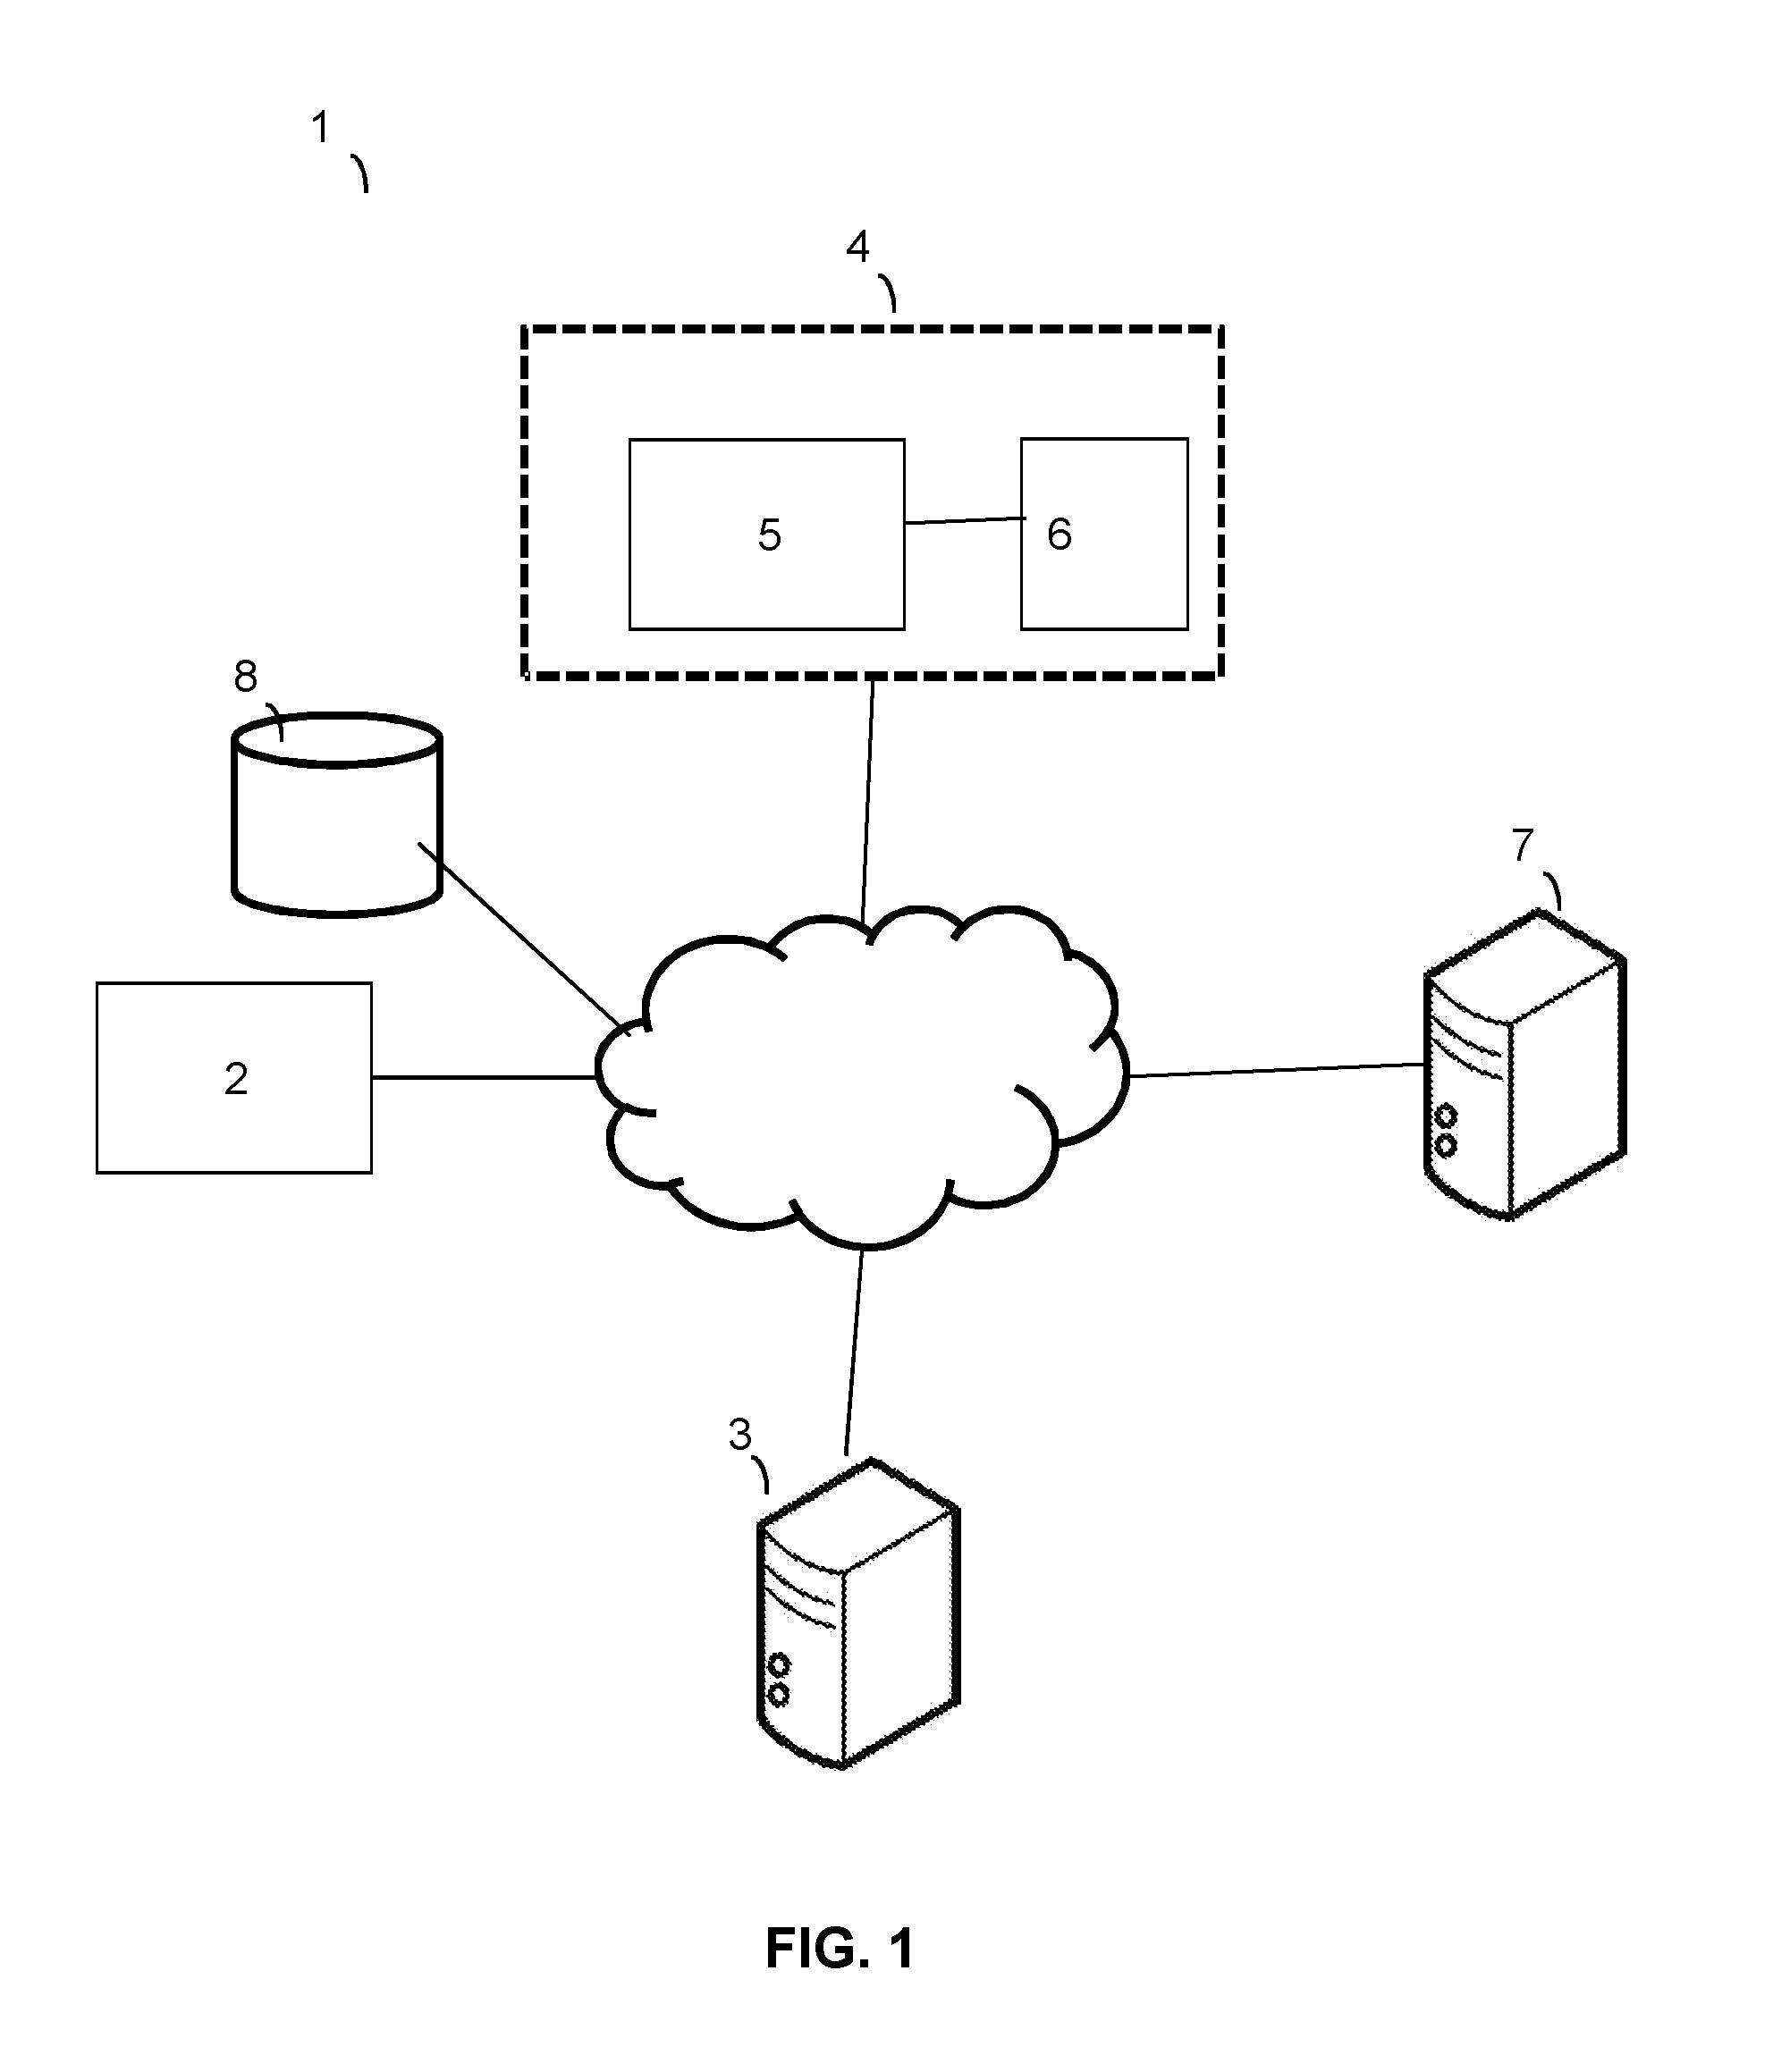 Method for generating a message signature from a signature token encrypted by means of a homomorphic encryption function